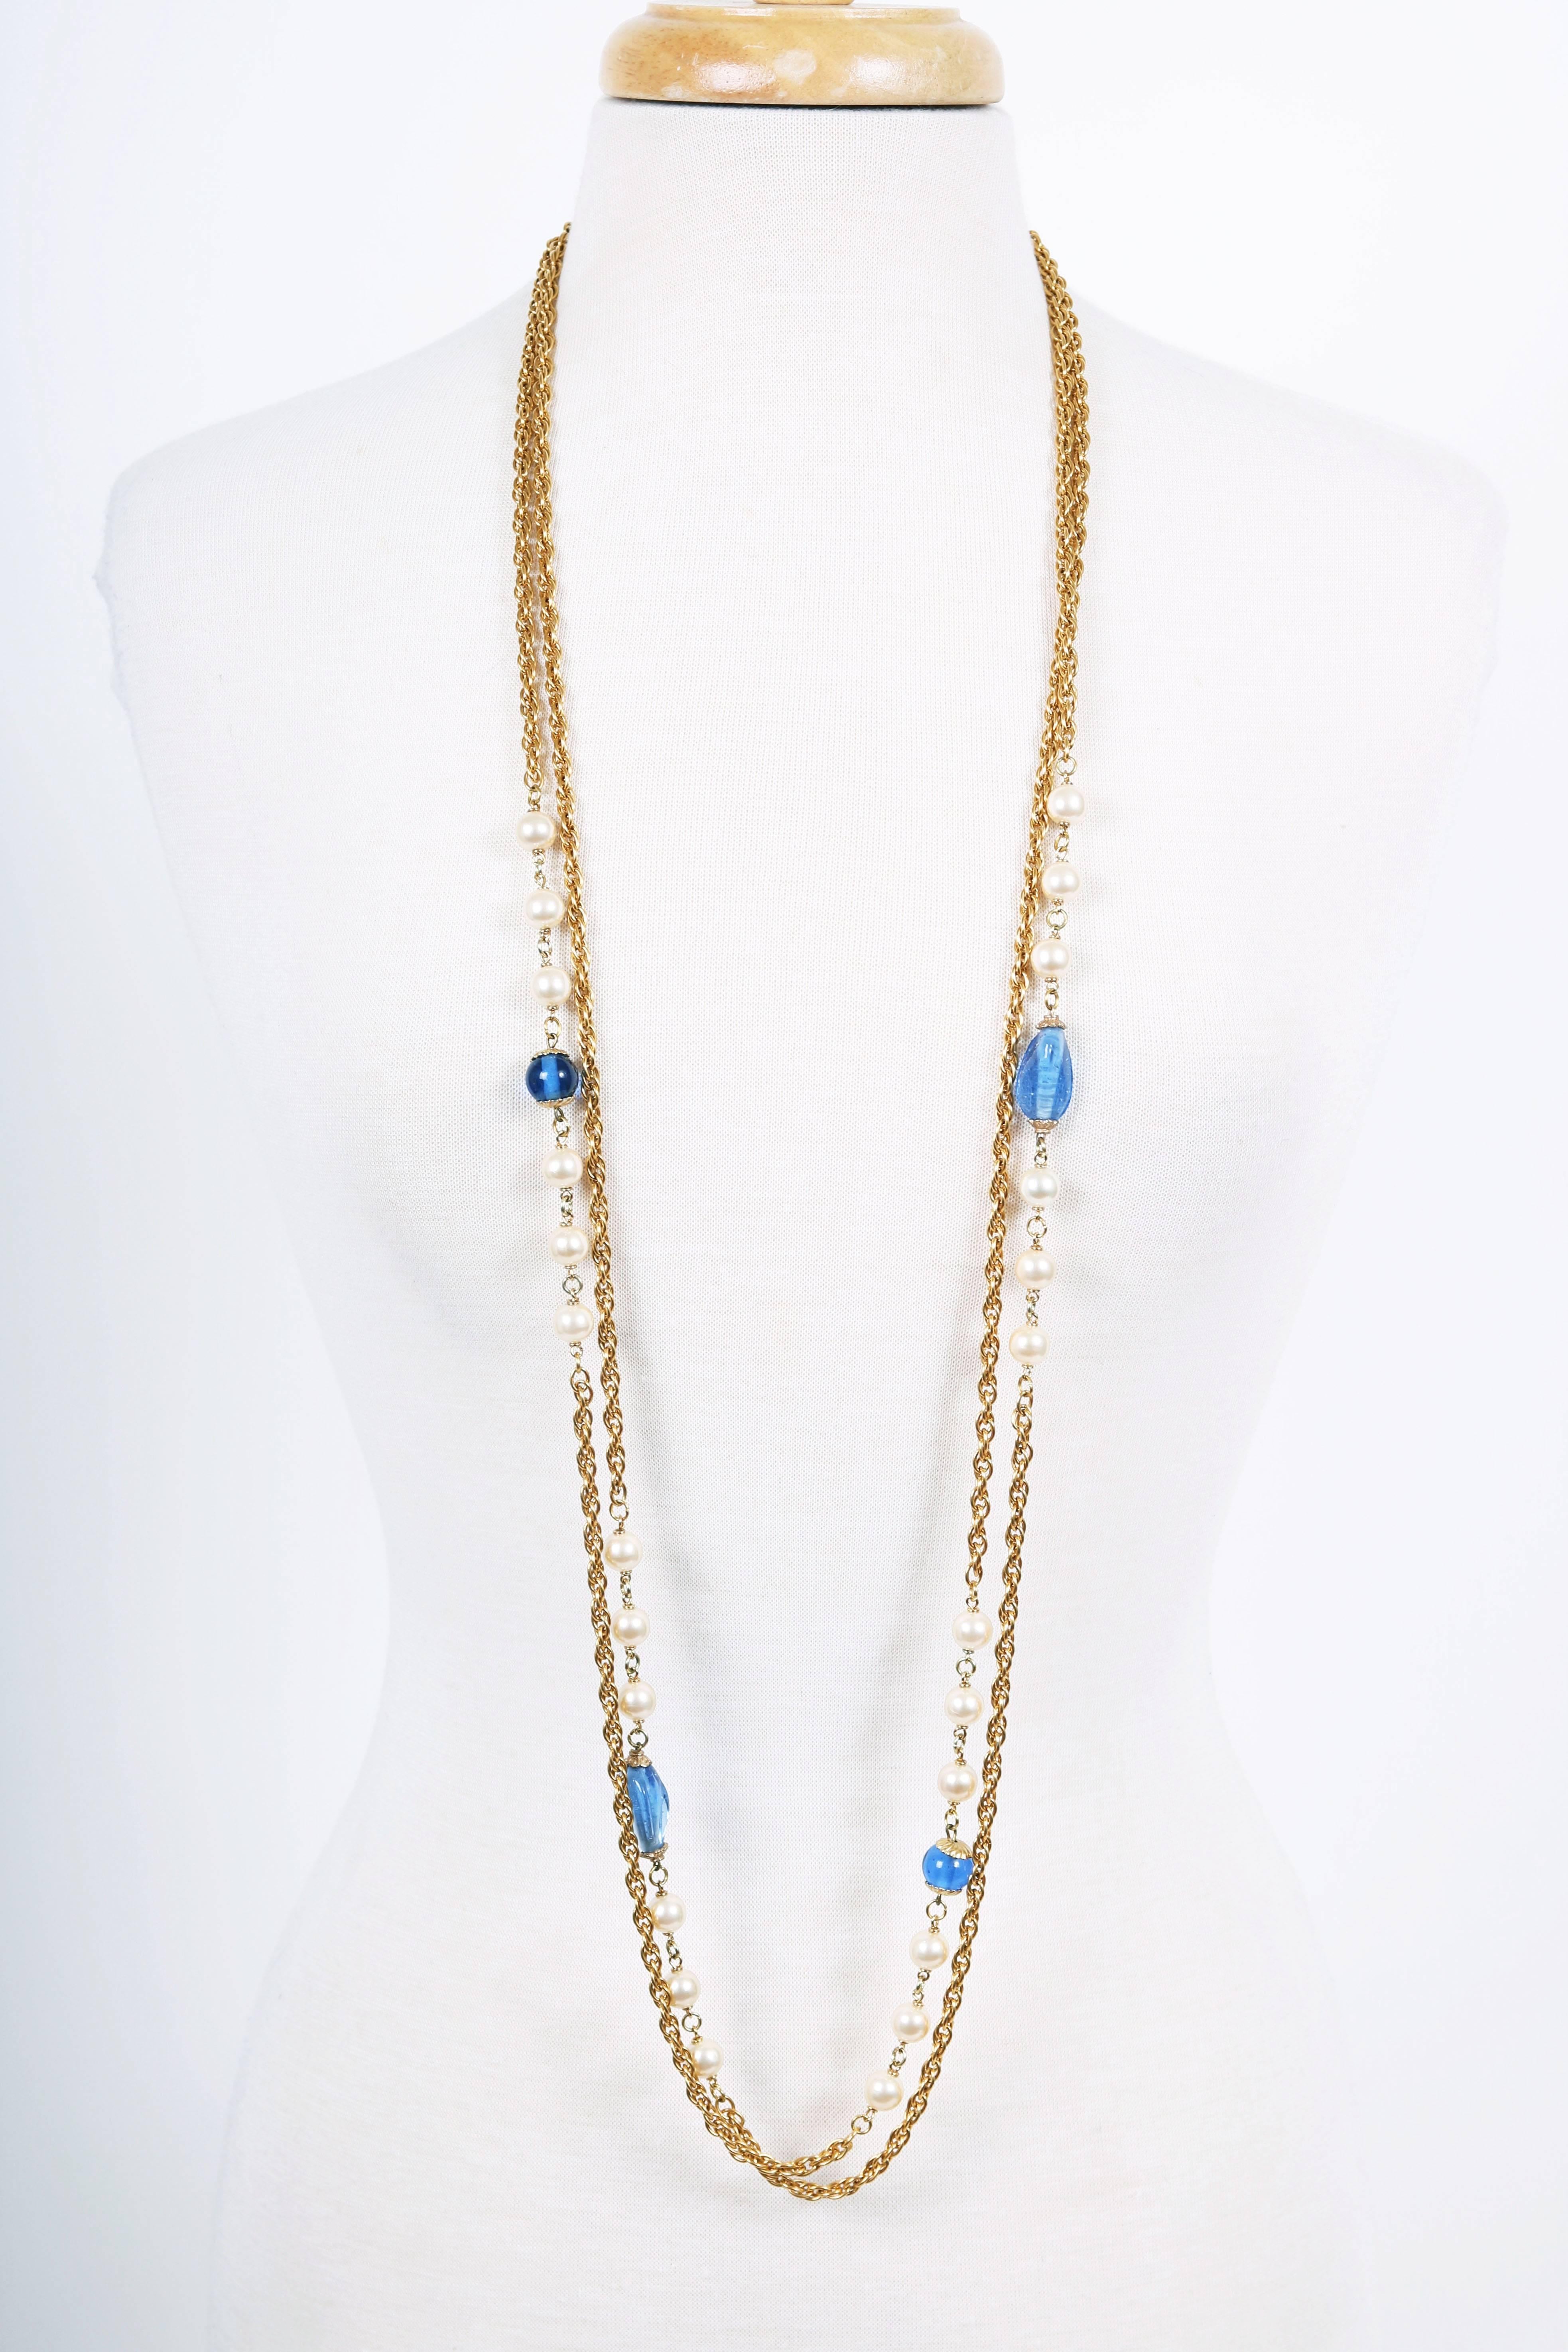 1980's Chanel 24k gold plated double stranded chain sautoir with pearls and blue gripoix beads. Features a spring ring and swivel clasp closure with oval stamped cartouche, 